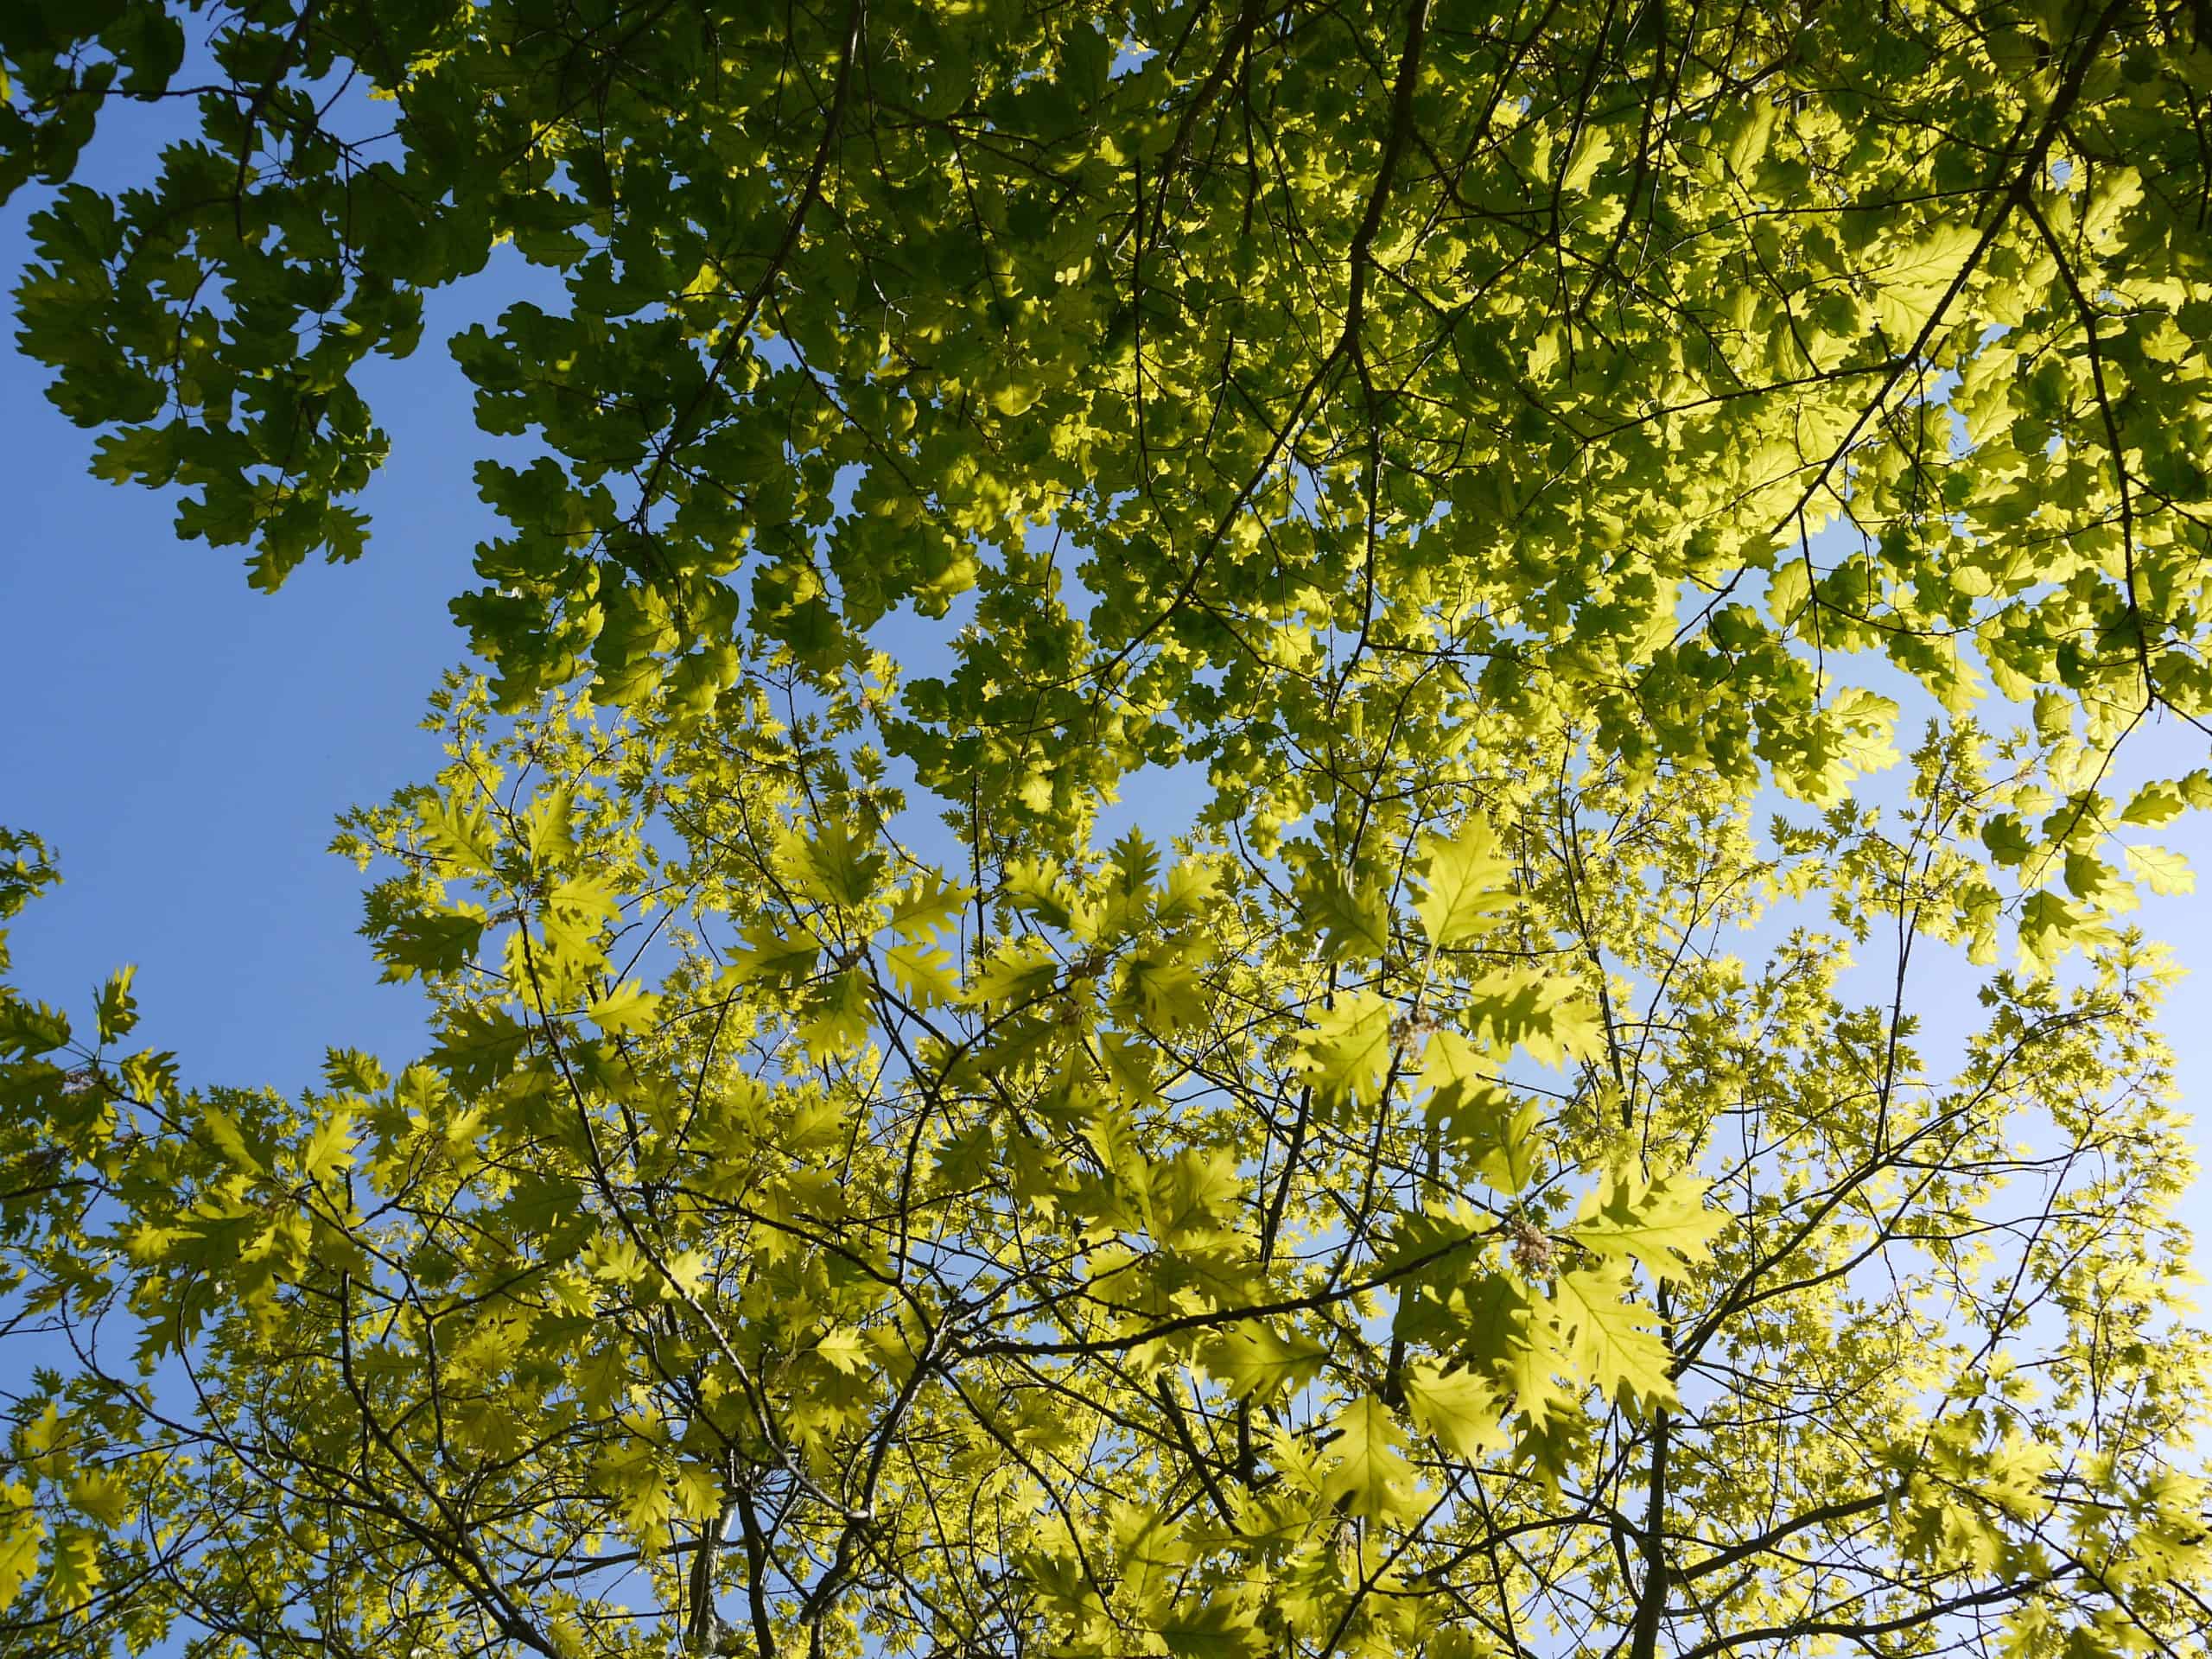 A view from below of a lush, sunlit tree canopy with various shades of green leaves against a clear blue sky.